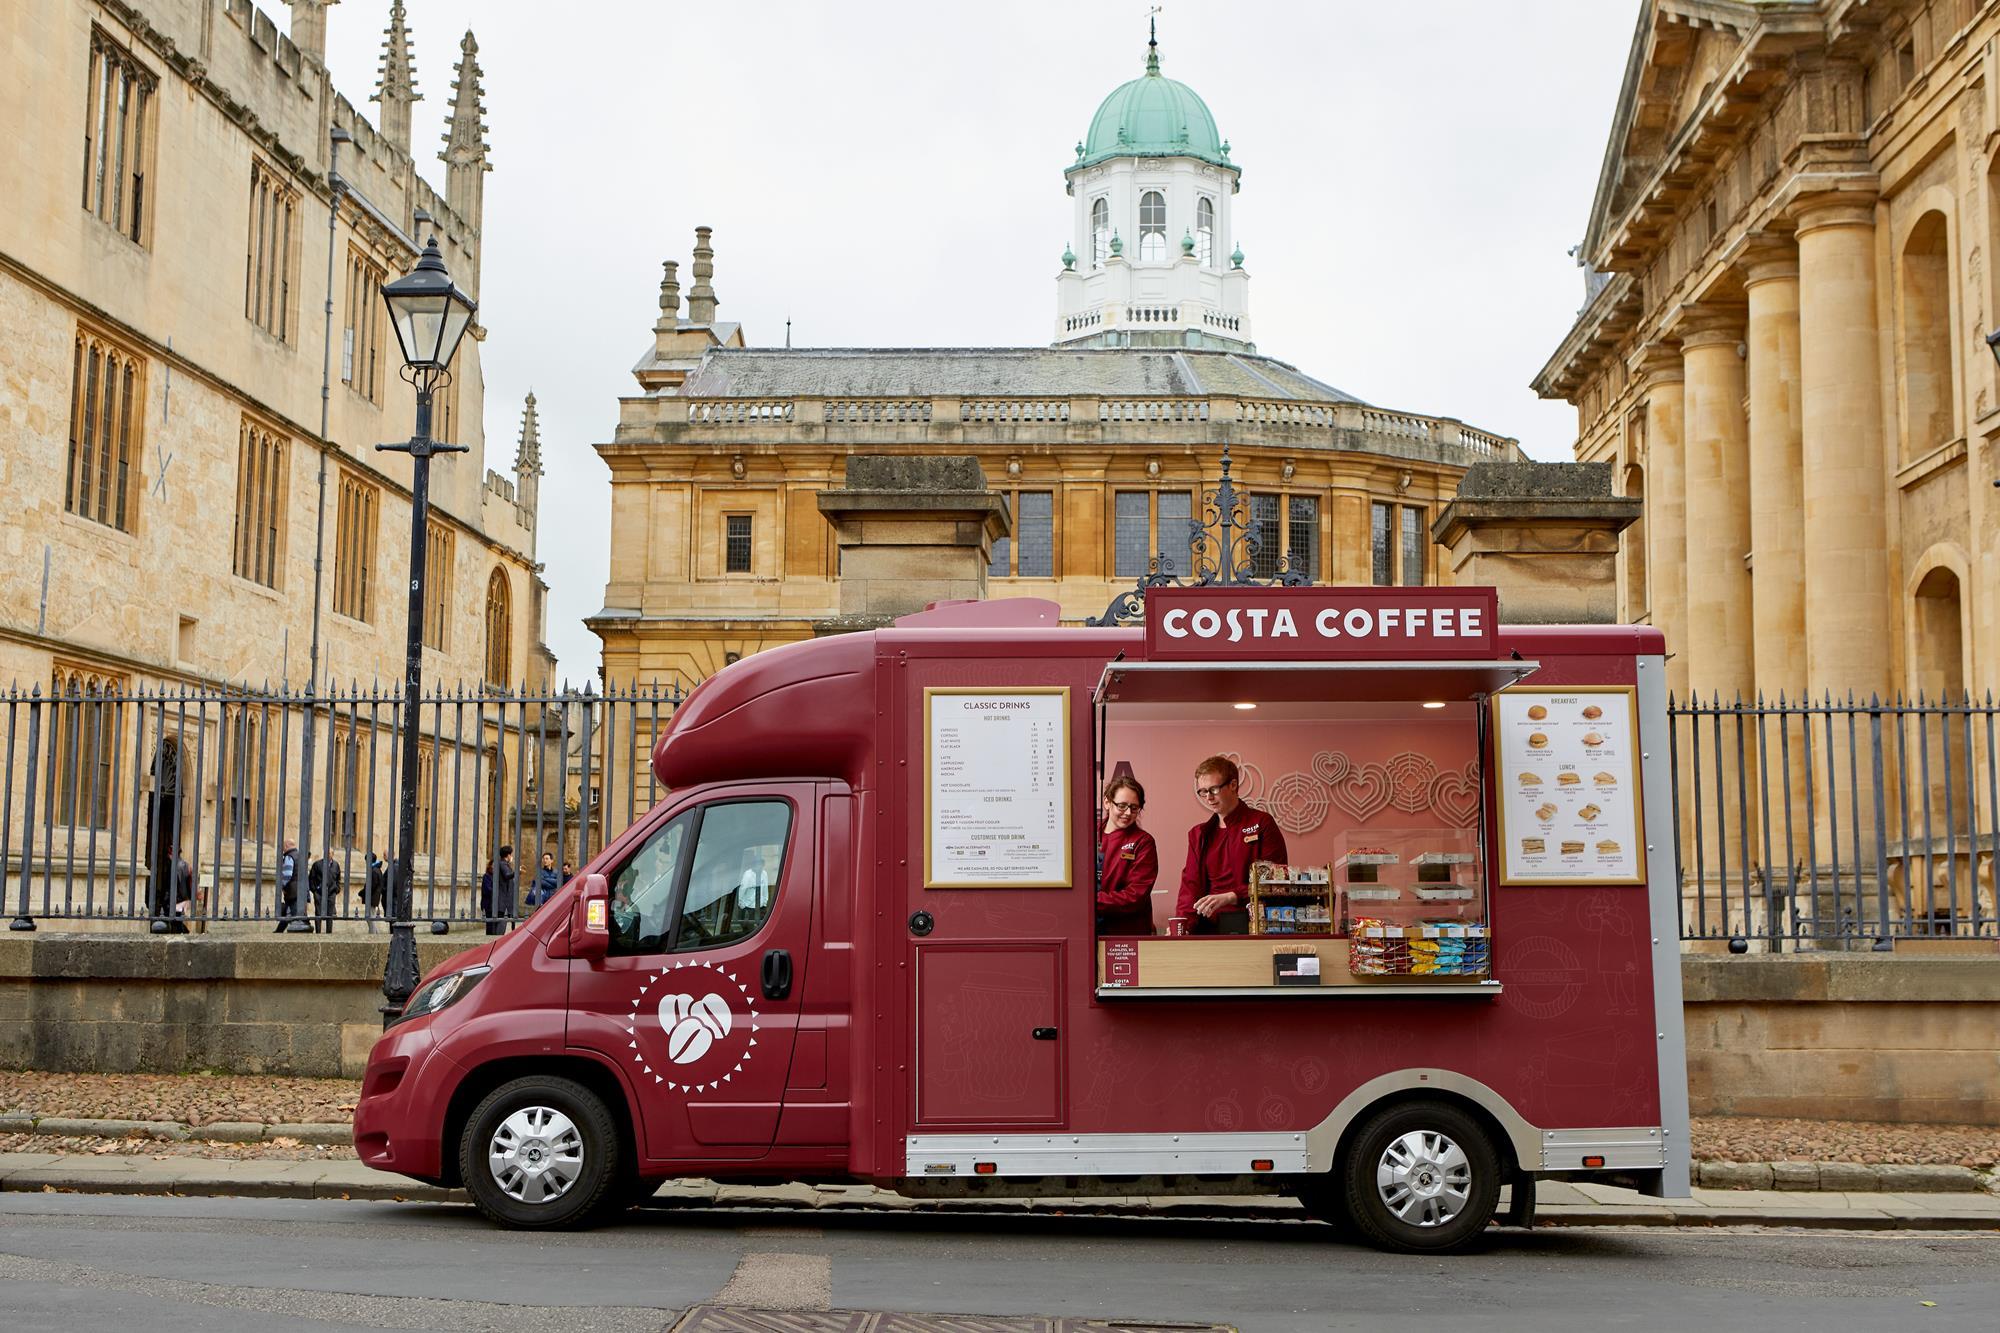 Monumental if Pants Costa Coffee debuts new mobile van service in Oxford | News | The Grocer